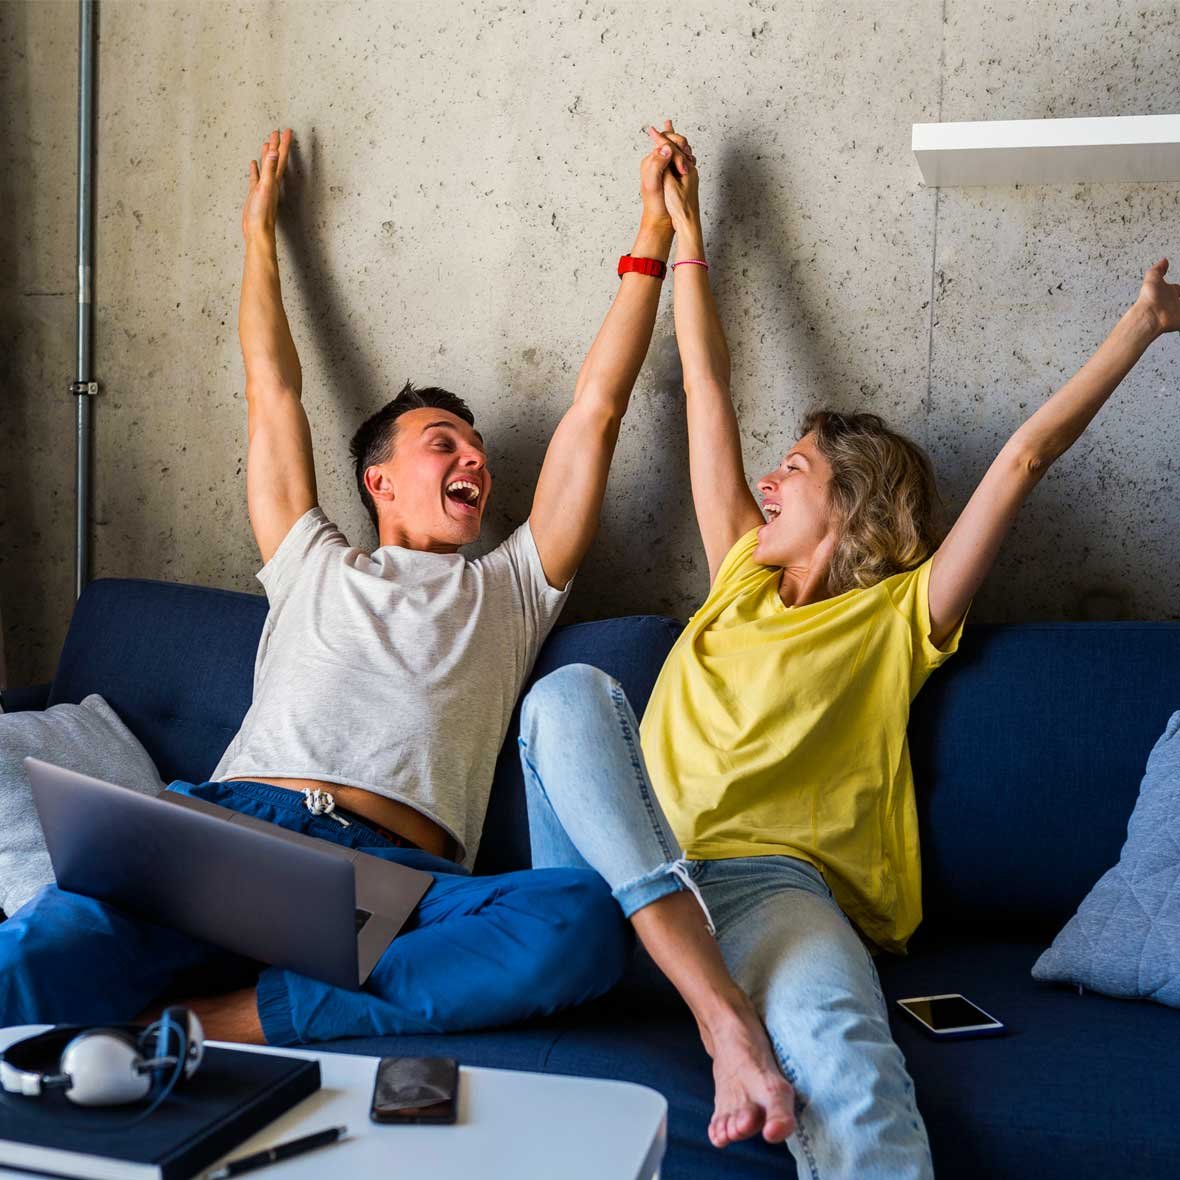 Get-excited-for-your-free-credit-score-tools-at-Finex-credit-union.